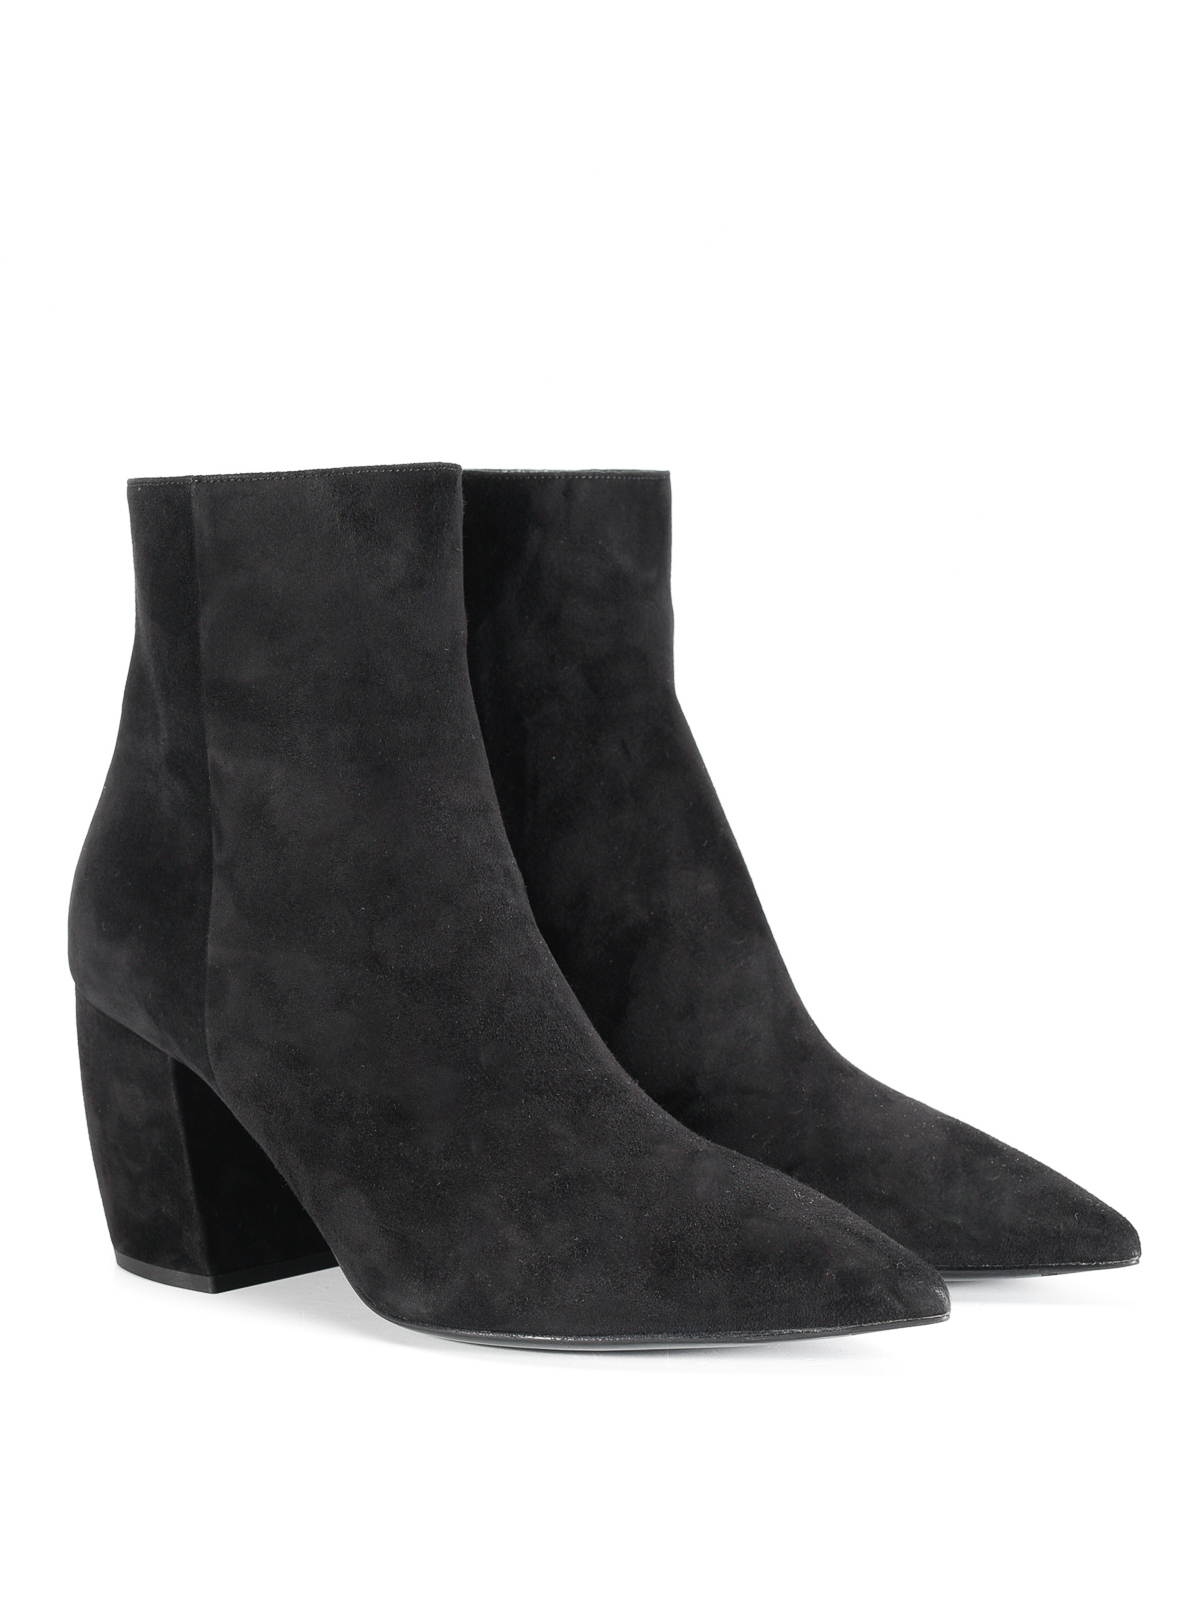 prada suede ankle boots